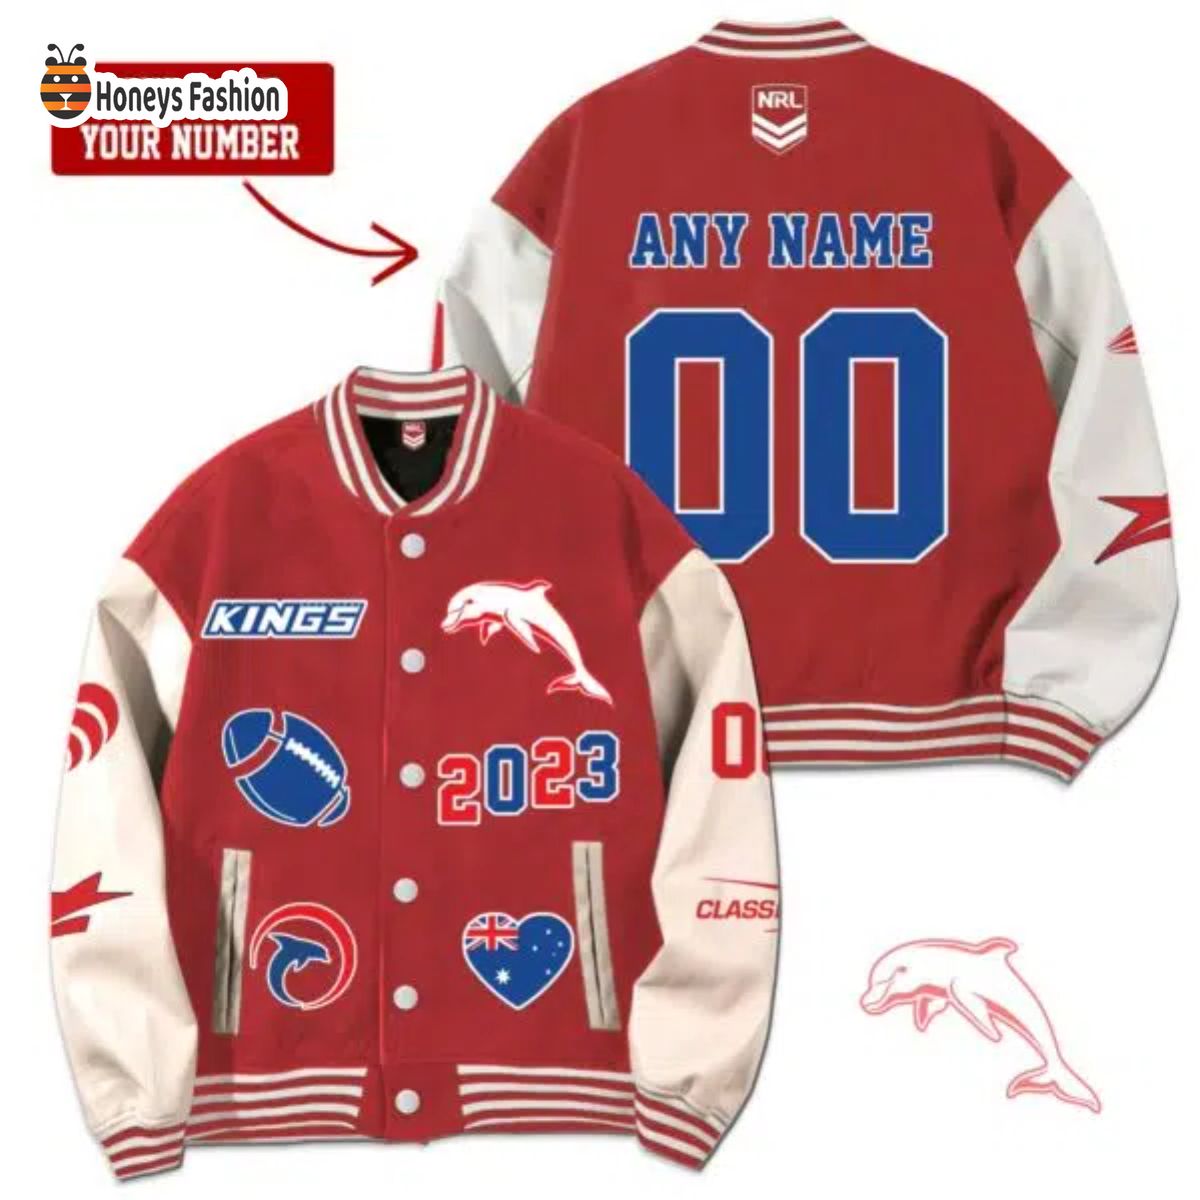 The Dolphins Custom Name Rugby Baseball Jacket